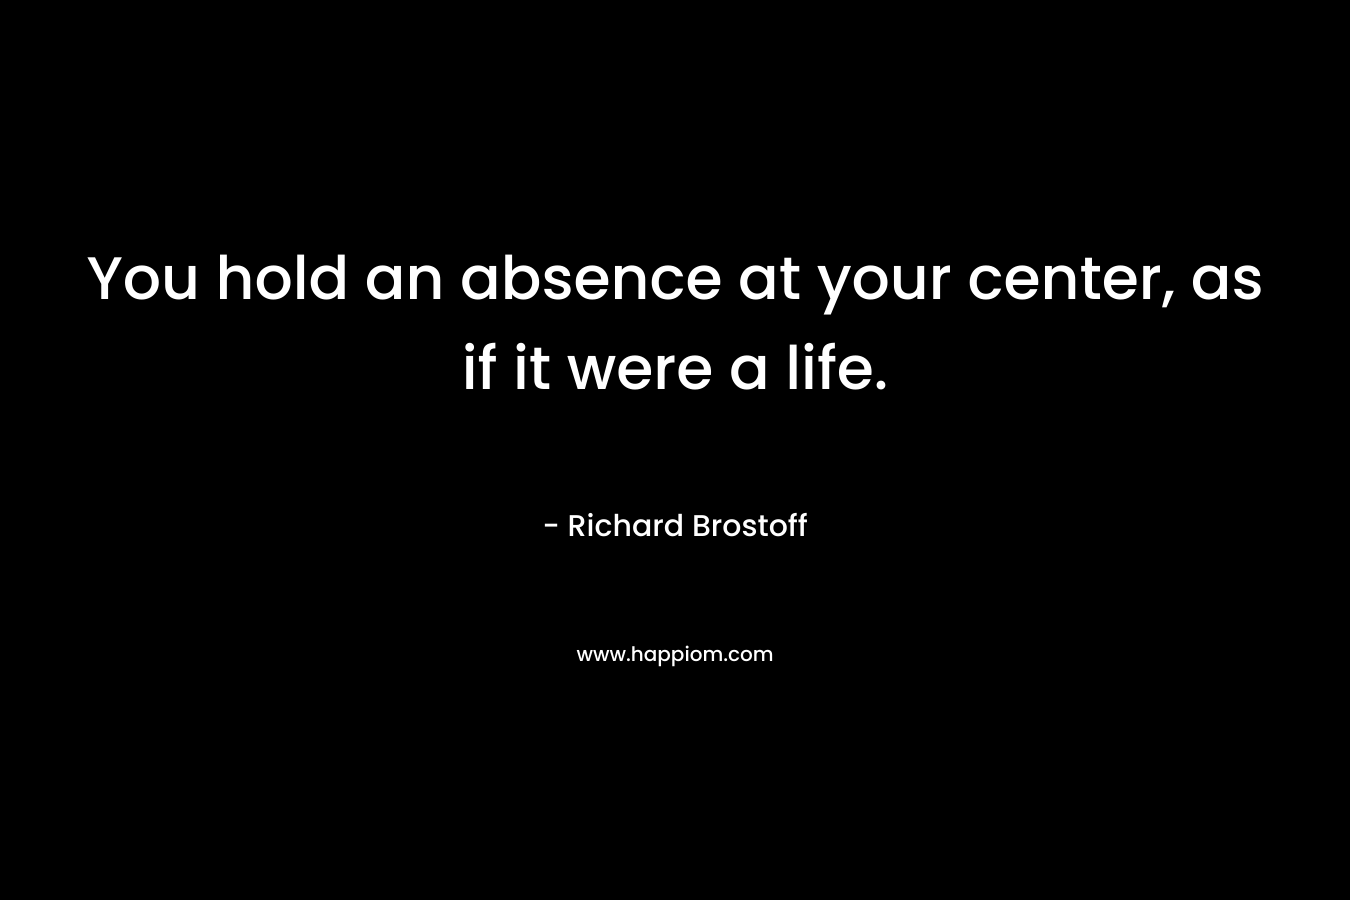 You hold an absence at your center, as if it were a life.